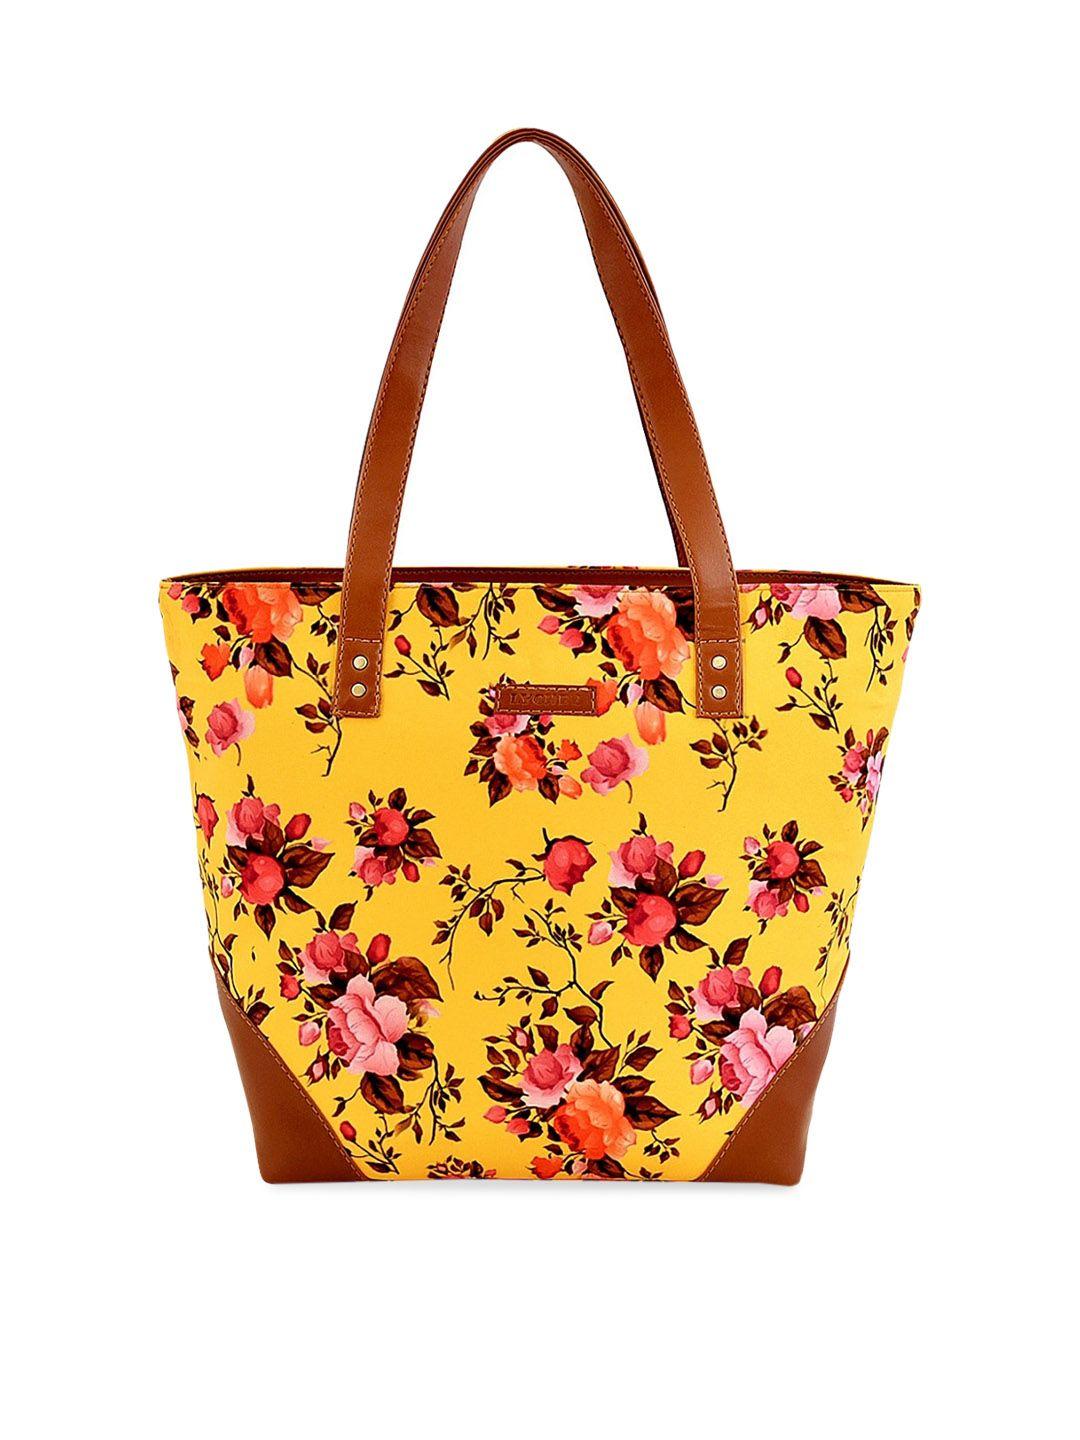 lychee bags yellow & red printed tote bag